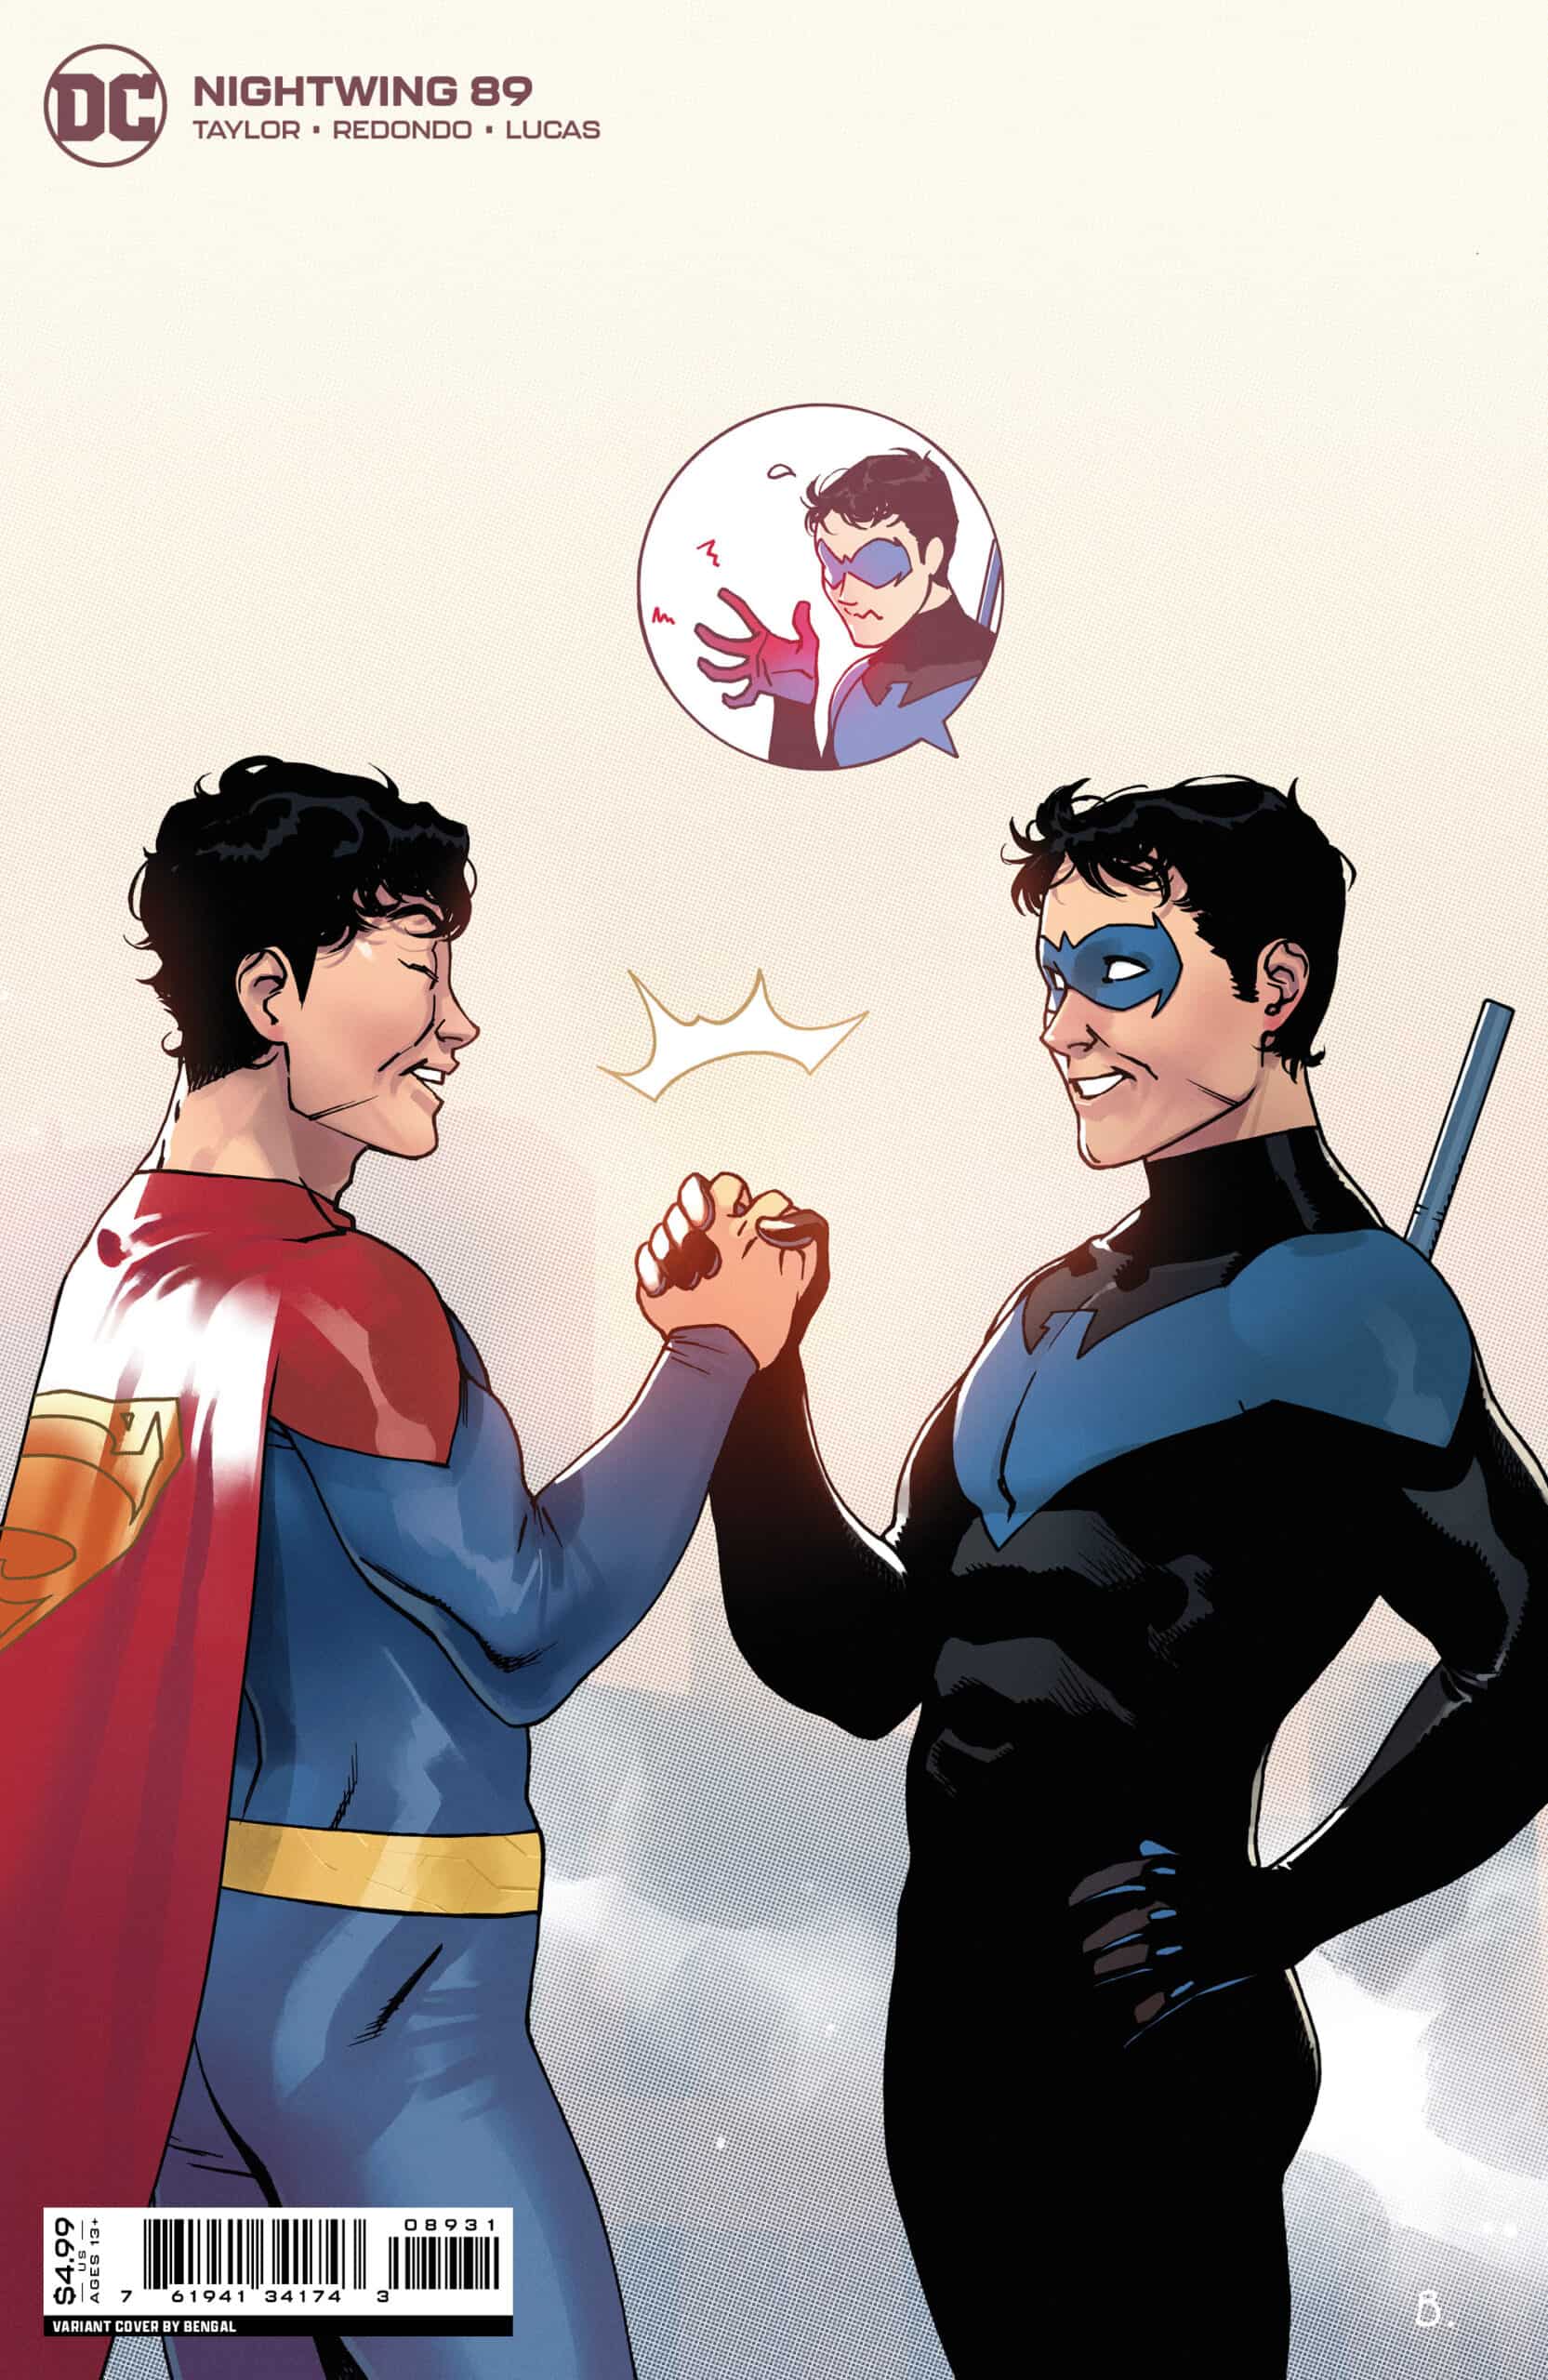 FIRST LOOK: Nightwing #89 by Taylor, Redondo, Lucas and Abbot (in ...